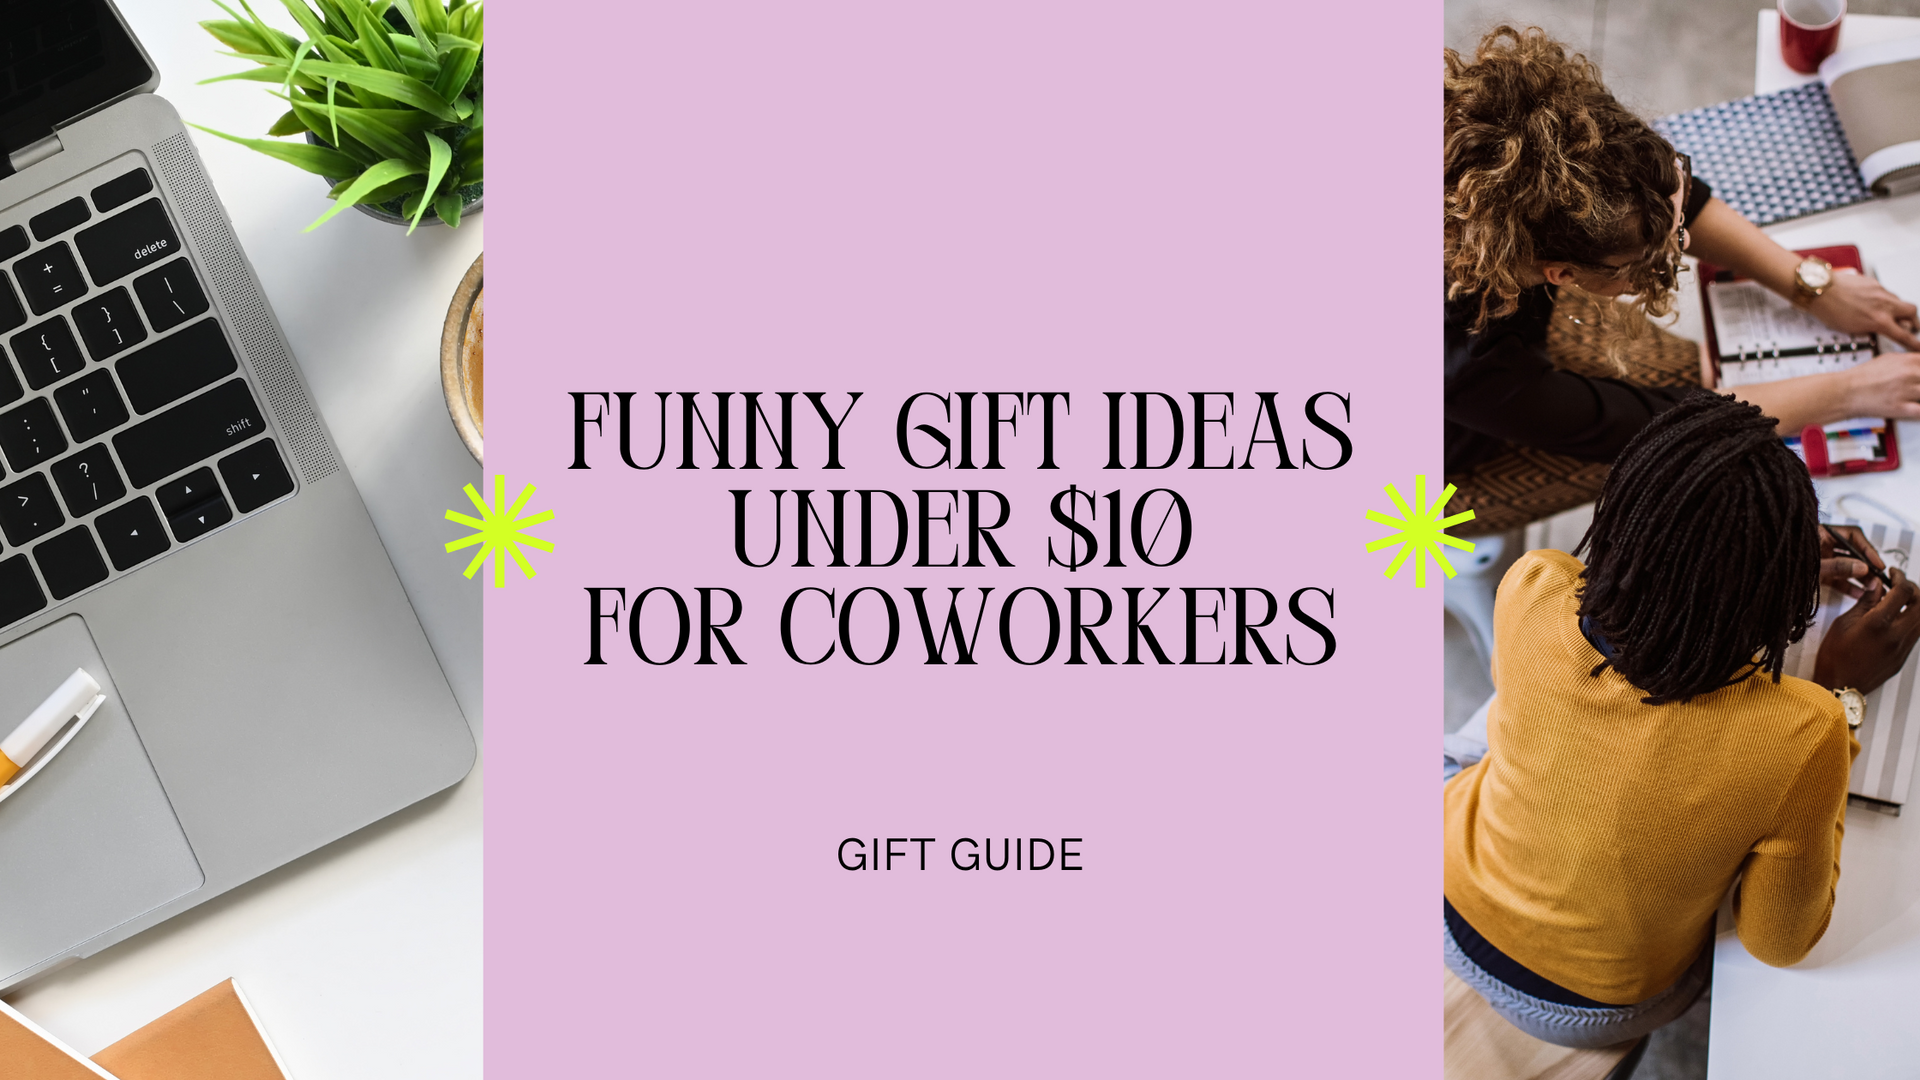 10 Hilarious Work-Related Gifts for Coworkers & Office Parties